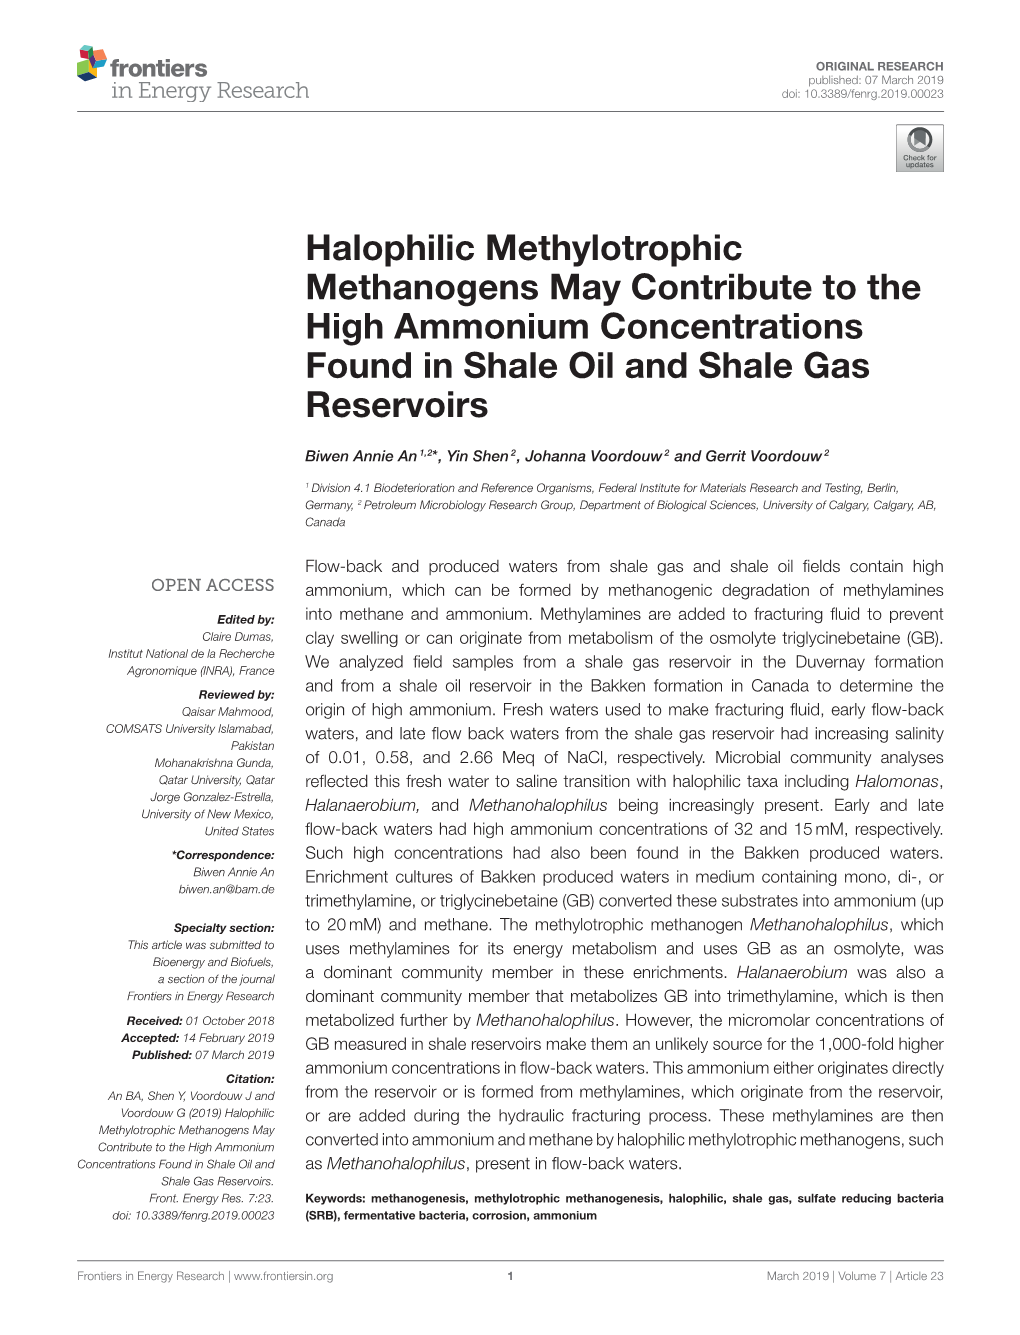 Halophilic Methylotrophic Methanogens May Contribute to the High Ammonium Concentrations Found in Shale Oil and Shale Gas Reservoirs